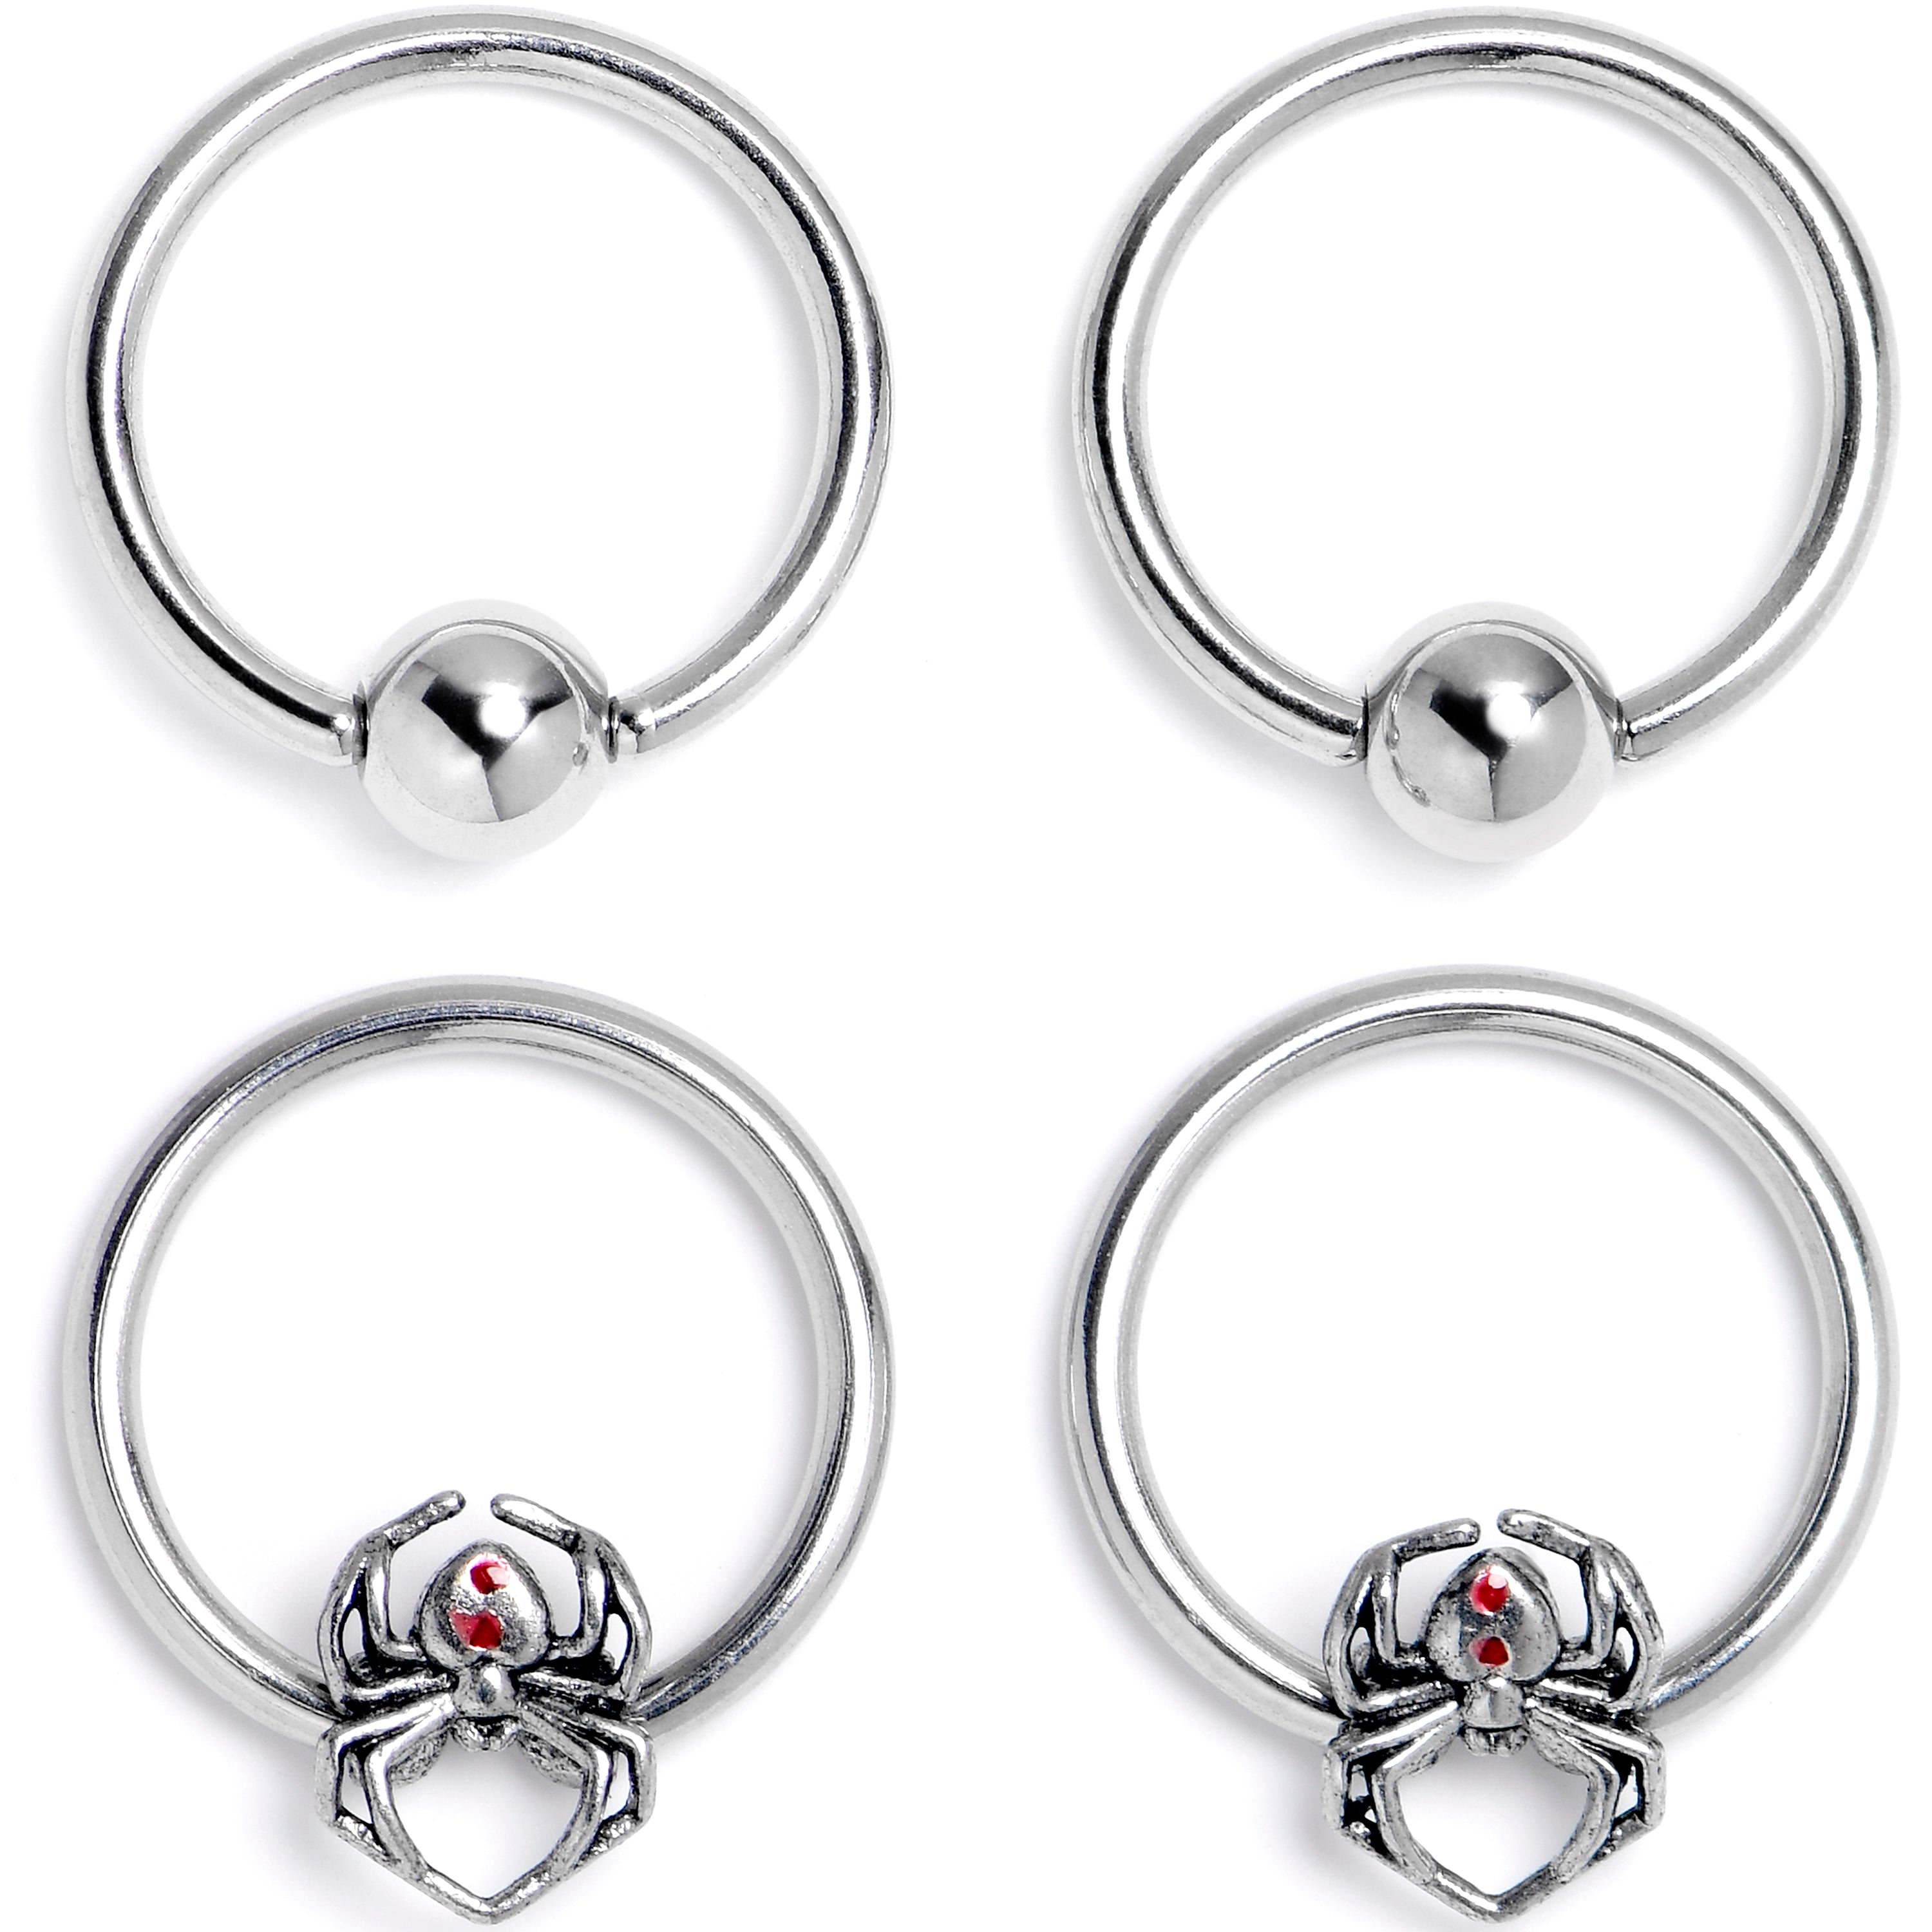 16 Gauge 3/8 Spiders Red BCR Captive Bead Ring Set of 4